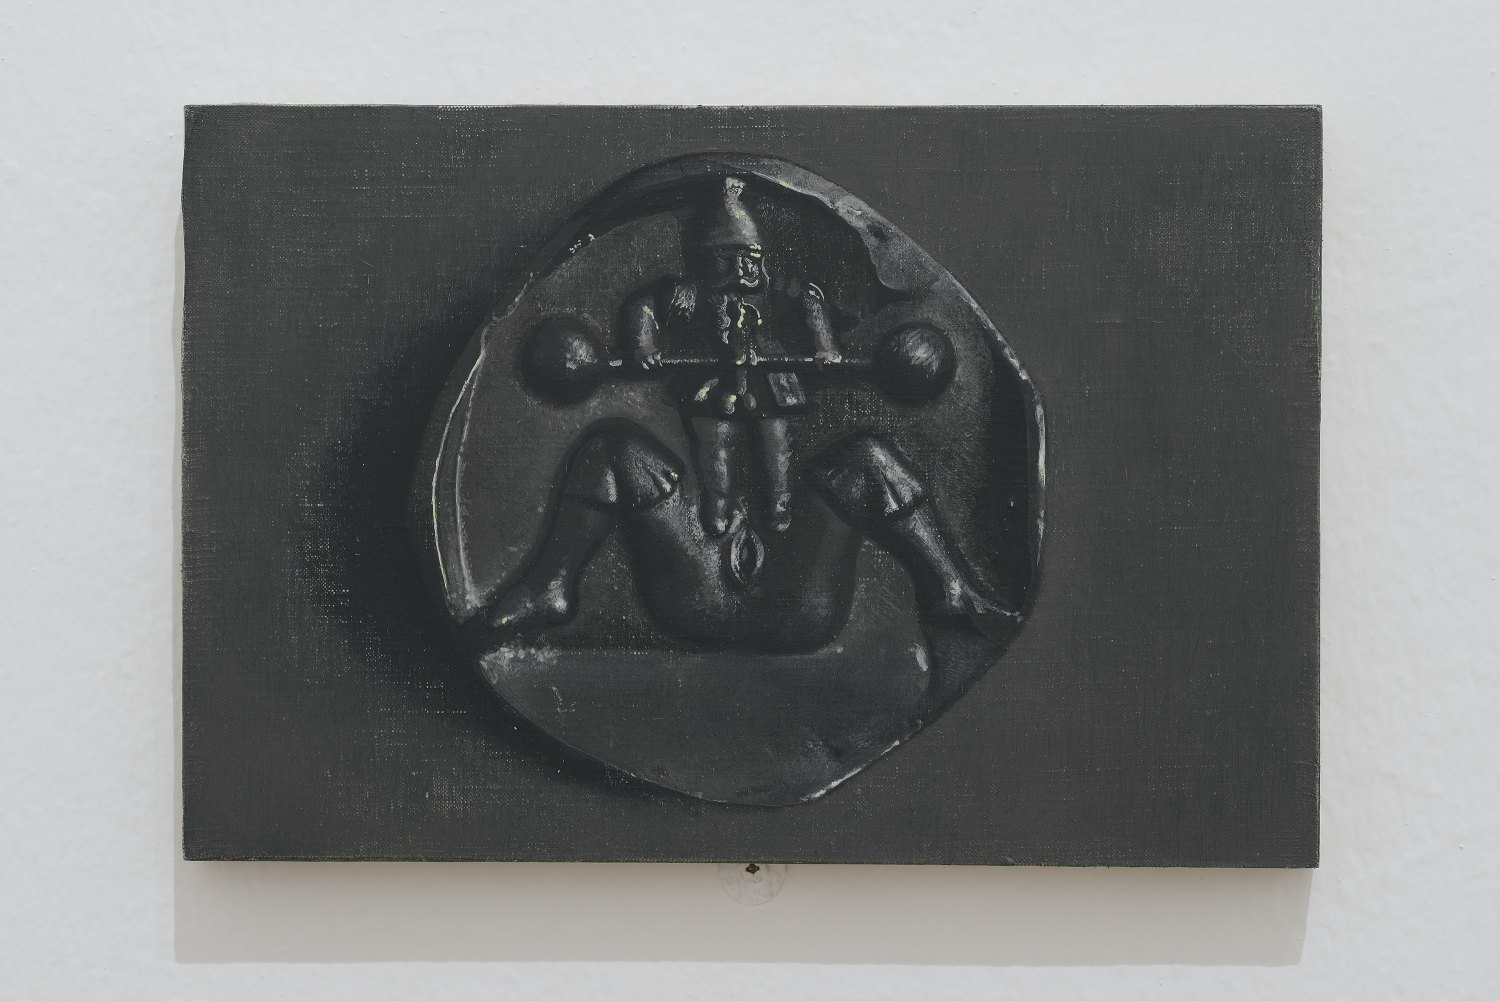 Victor Man Untitled, 2013 Oil on linen mounted on wood, 18 × 27 cm